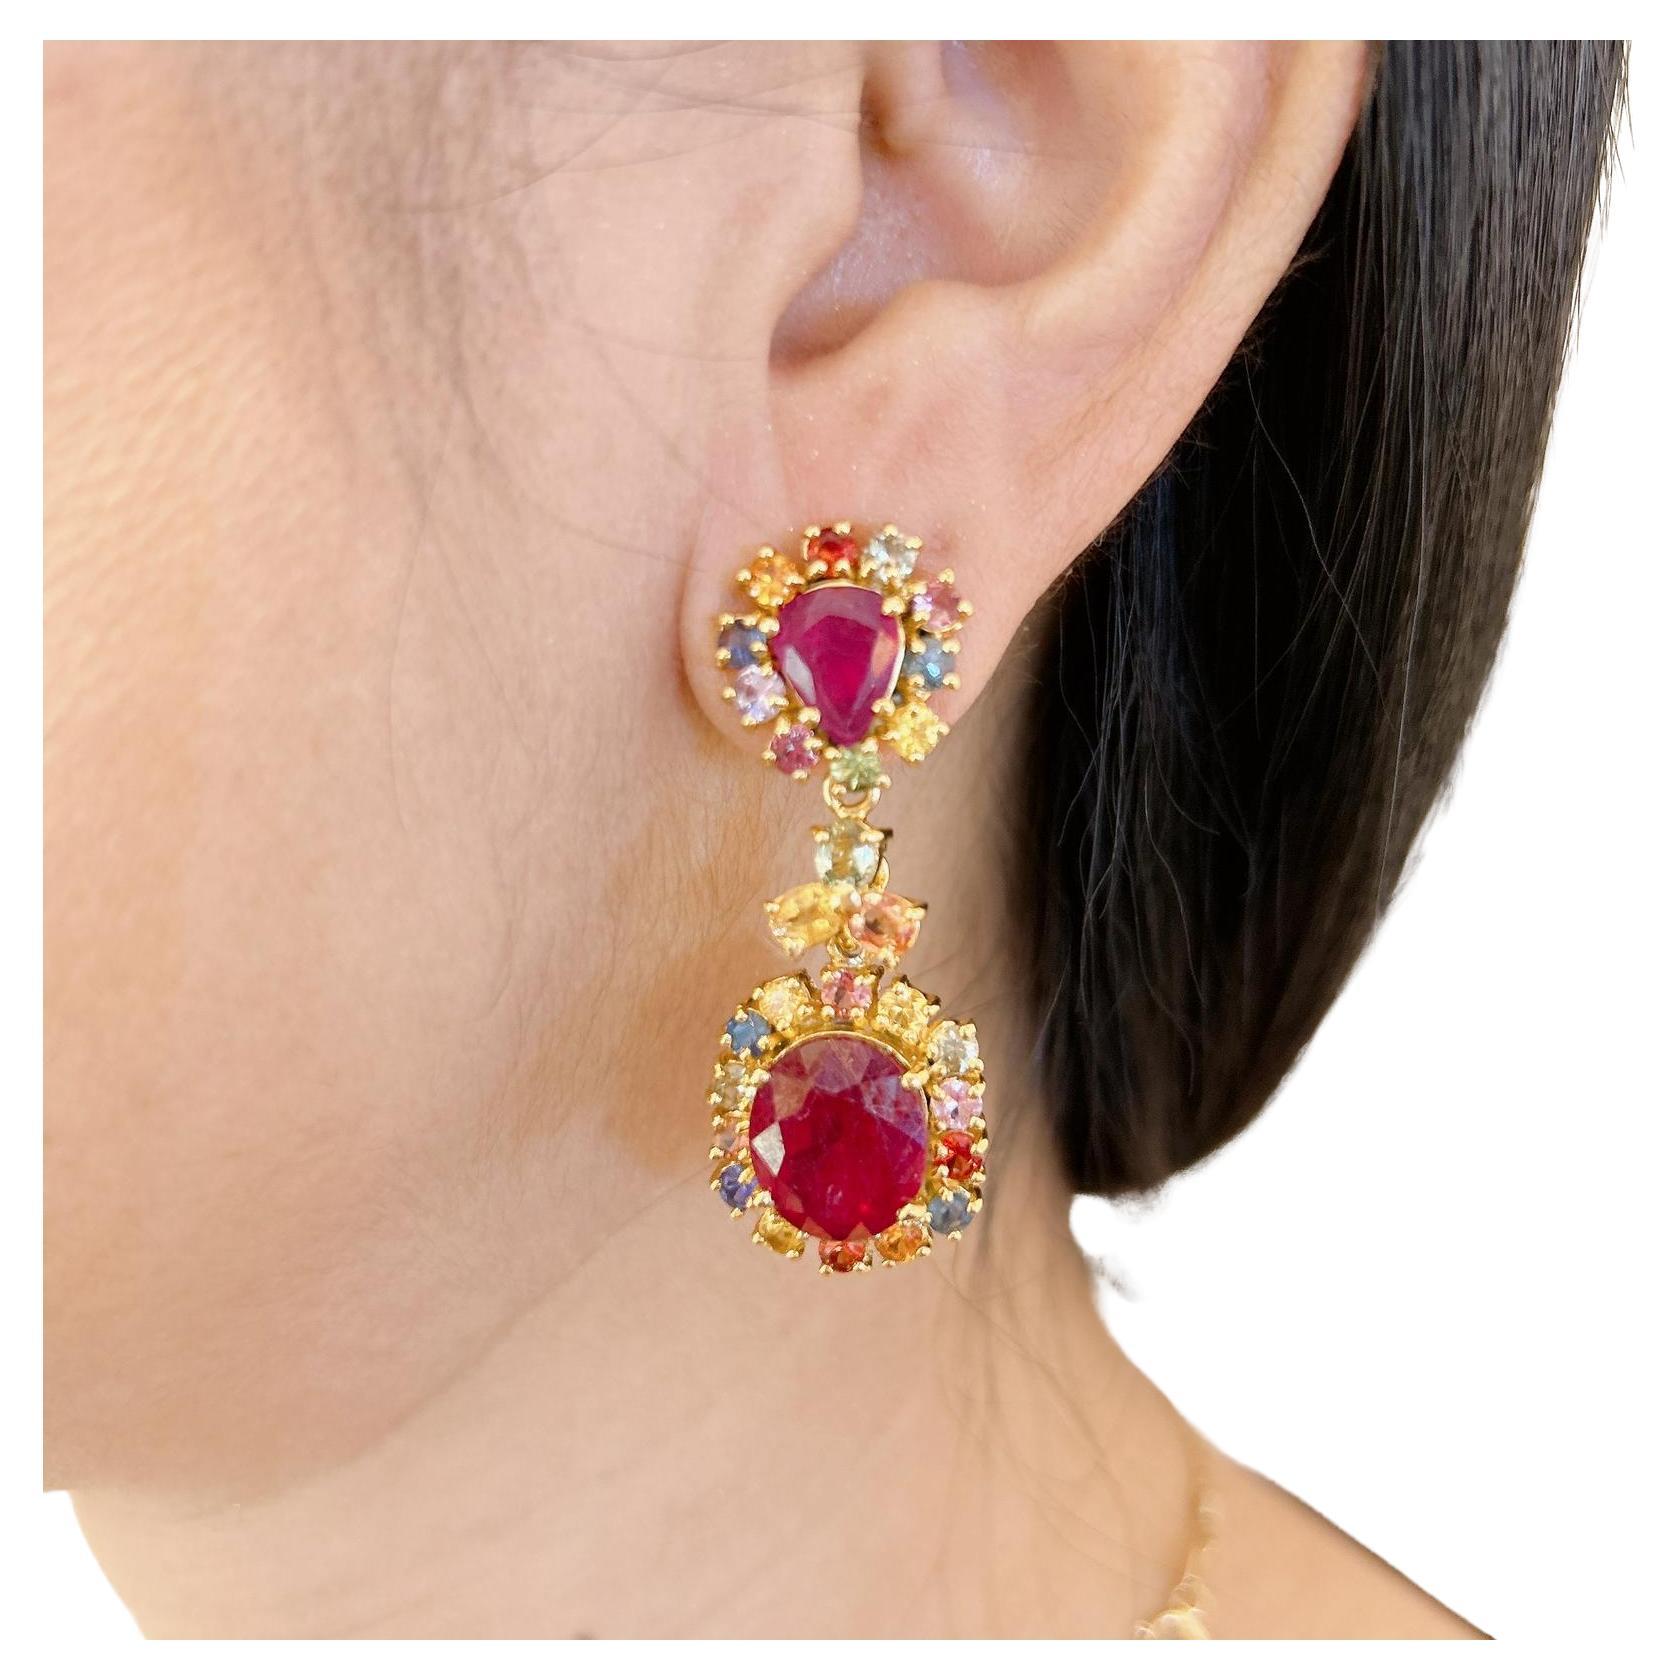 Bochic “Capri” Campari Ruby & Multi Color Fancy Sapphire Earrings Set in Gold&Silver set 22K Gold & Silver w
Natural Red Ruby - 19 carats
Natural Multi Color Sapphire from Sri Lankan  - 5 carats 
Sapphire colors, Red, Orange and Pink
This Earrings